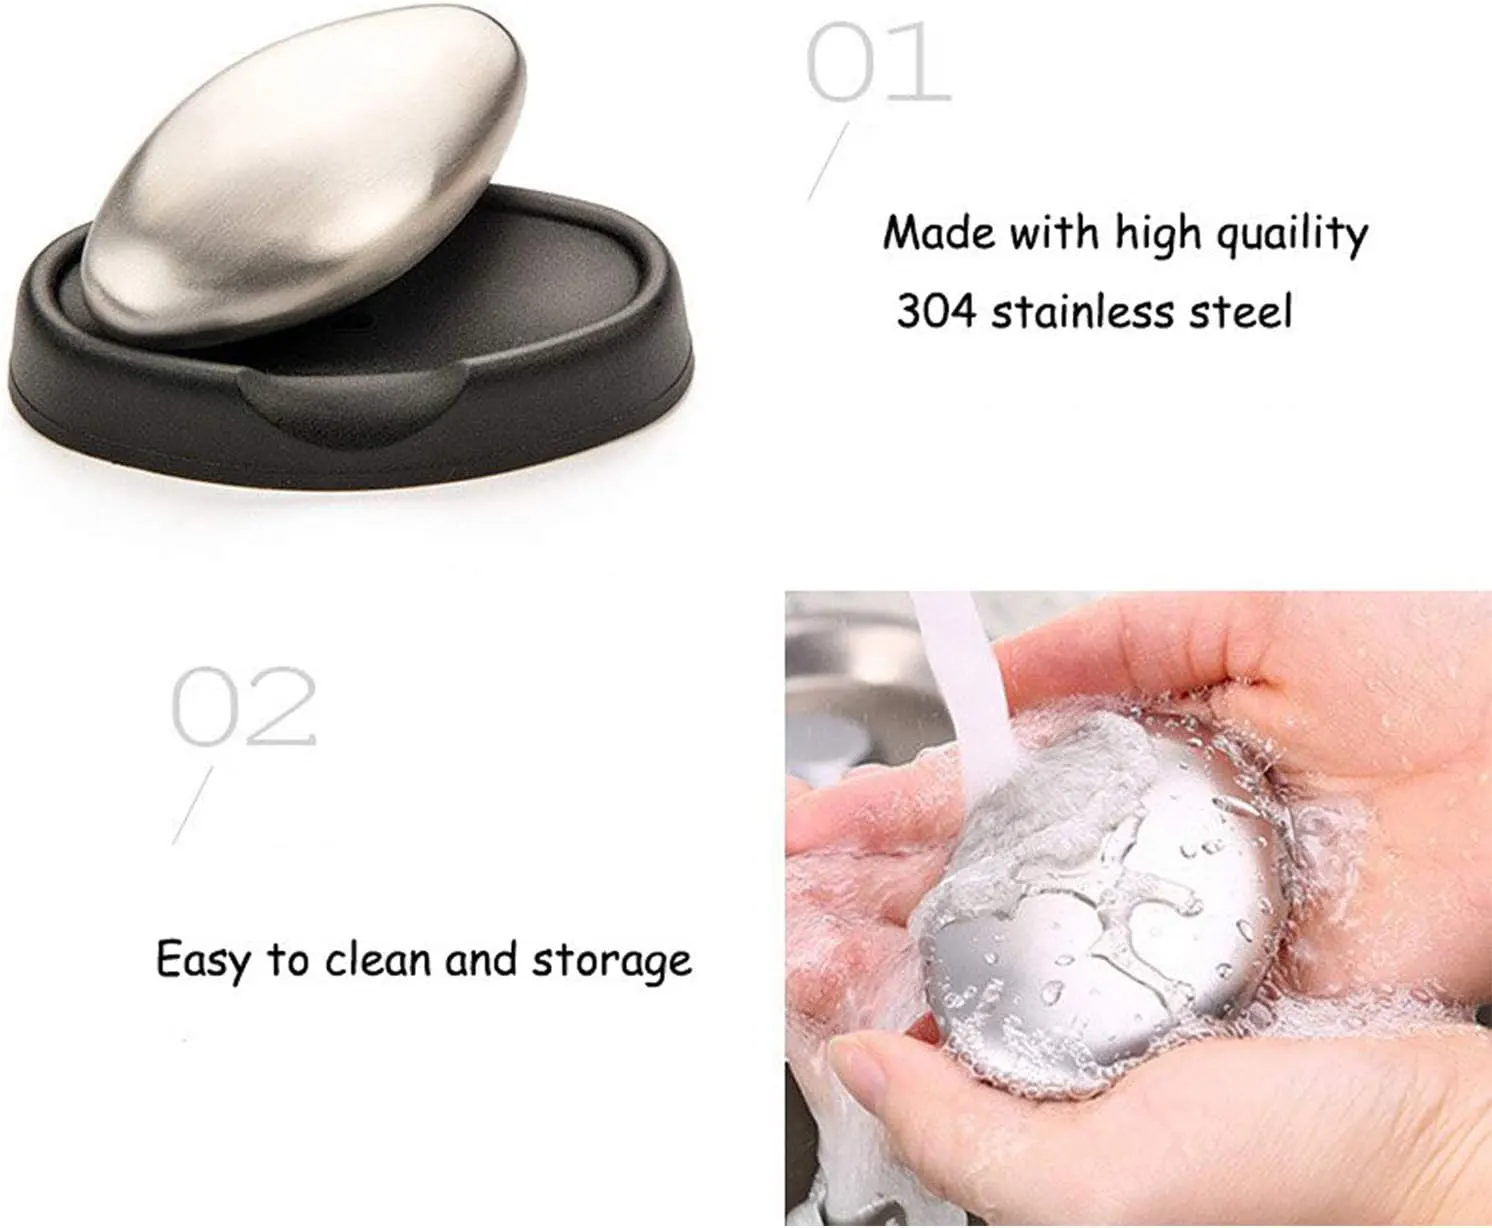 Stainless steel soap that removes unpleasant odors for hands and skin